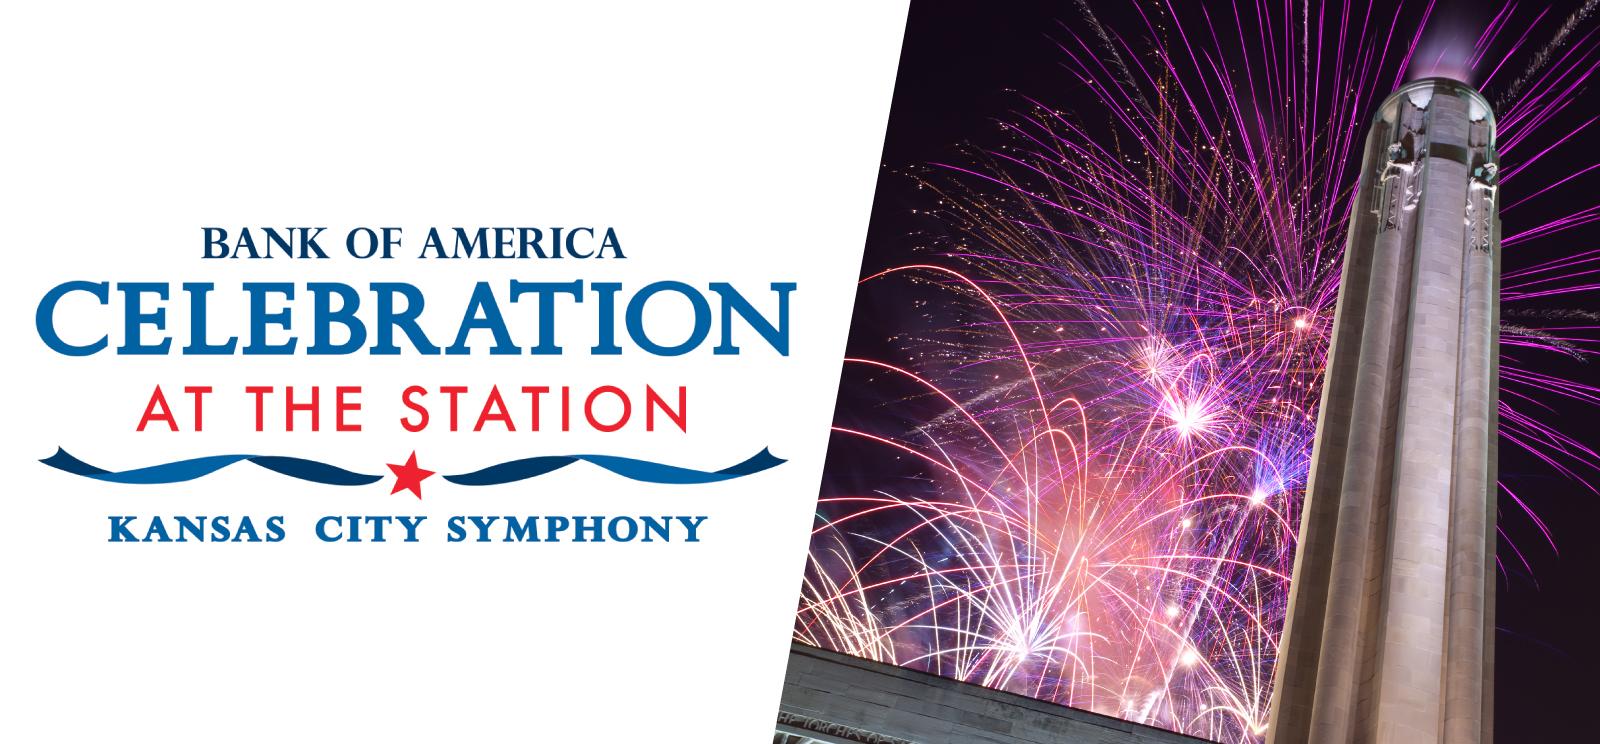 Left side text: Bank of America / Celebration at the Station / Kansas City Symphony. Right side image: Modern photograph of the Liberty Memorial tower with fireworks exploding behind it.